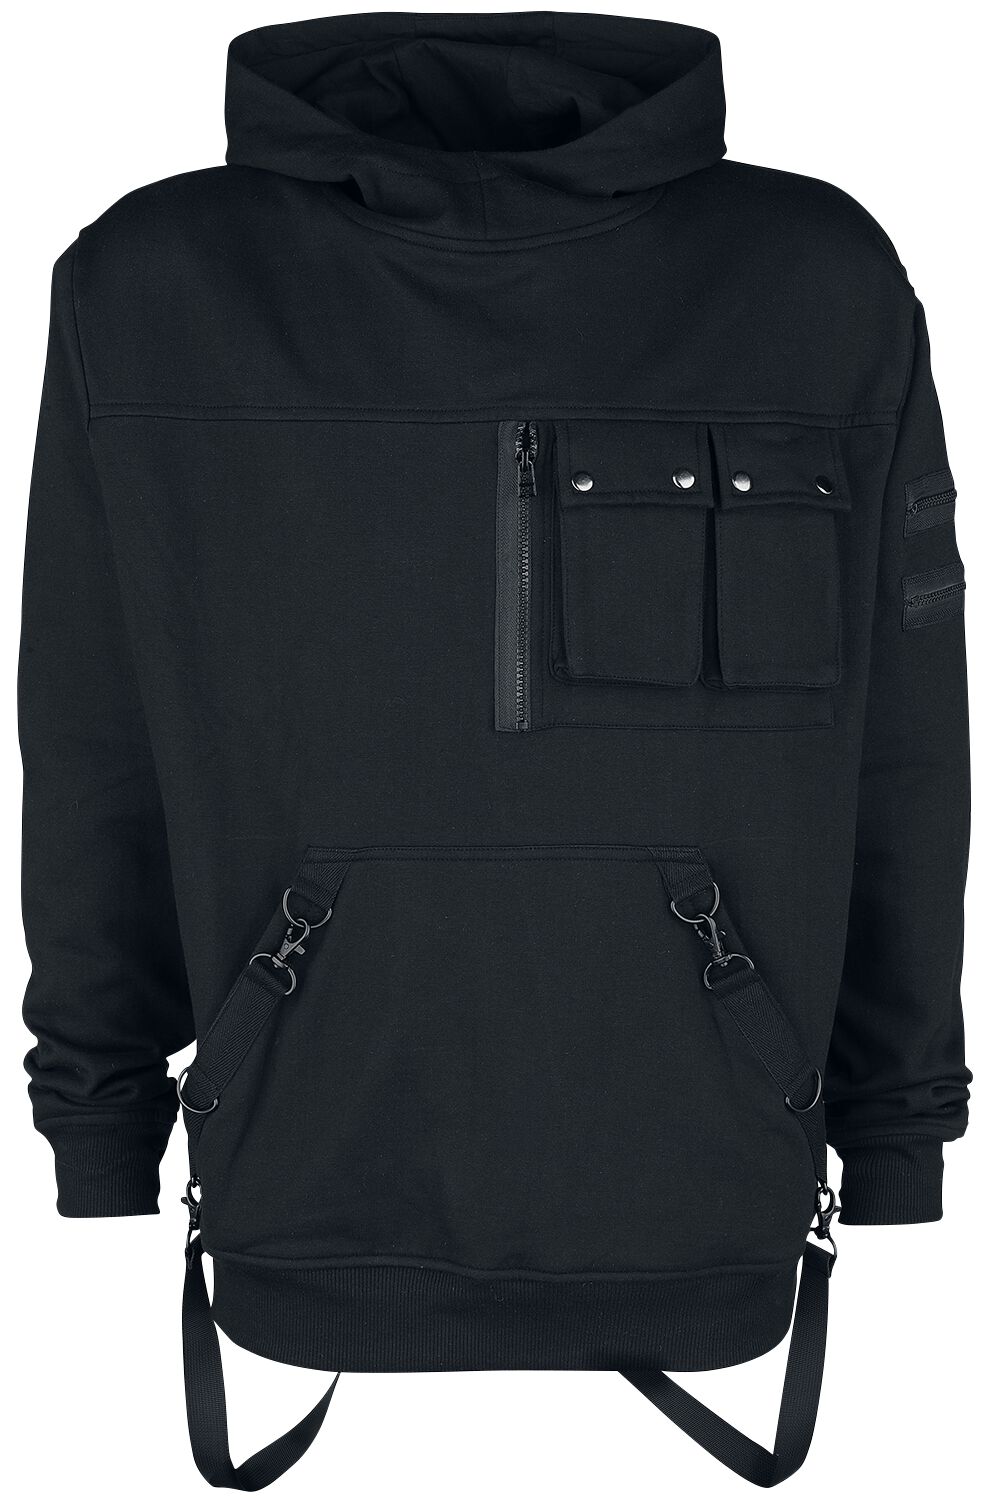 Poizen Industries Reznor hooded top Hooded sweater black